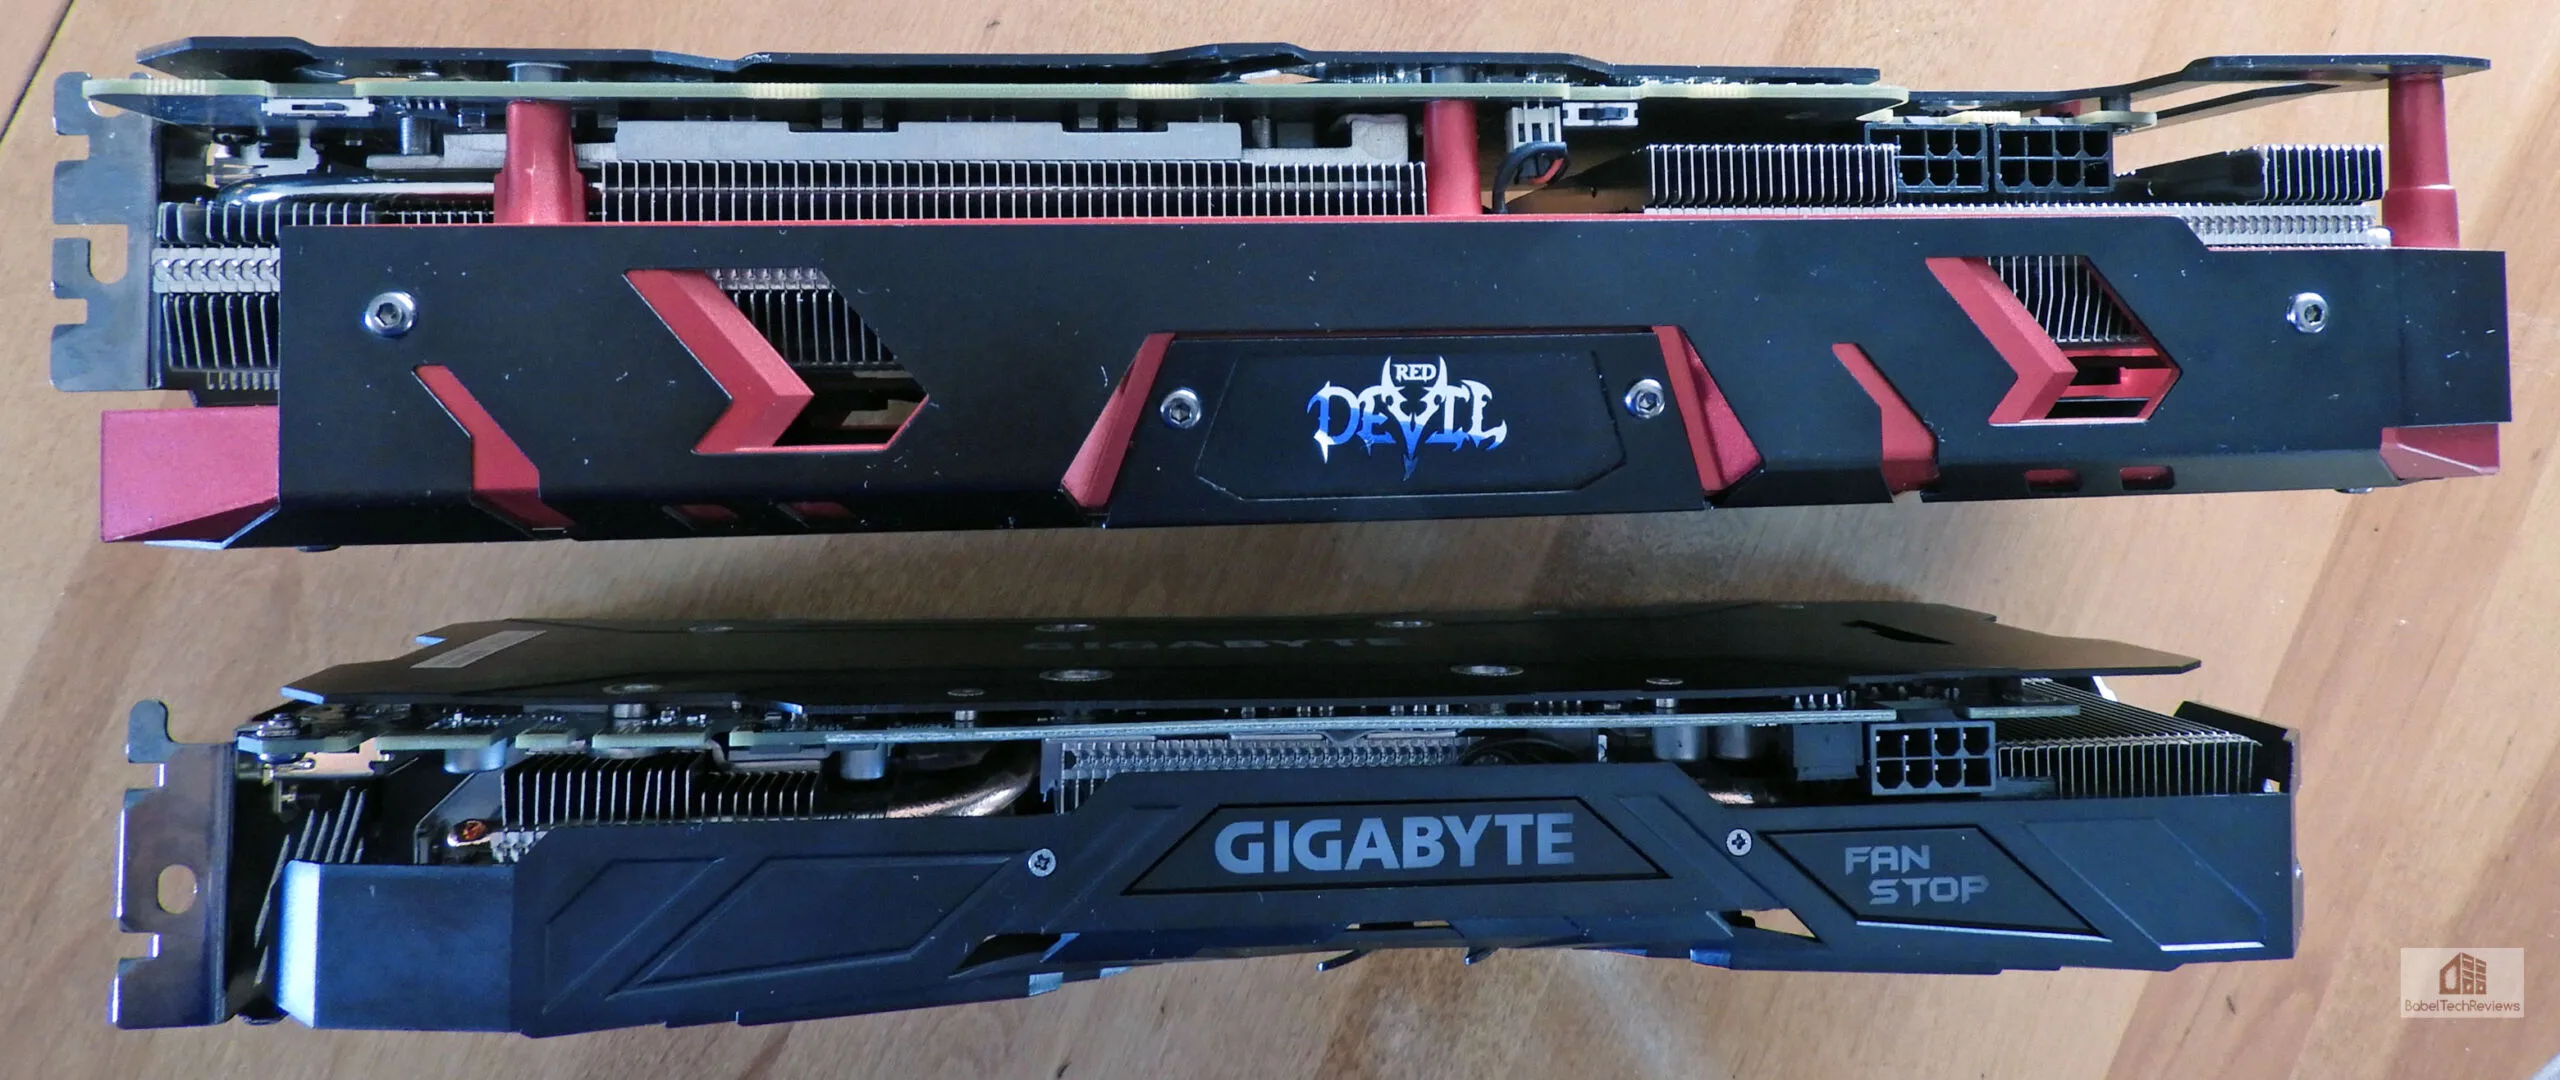 The Gigabyte GTX 1070 Ti Gaming OC 8G review versus the Red Devil